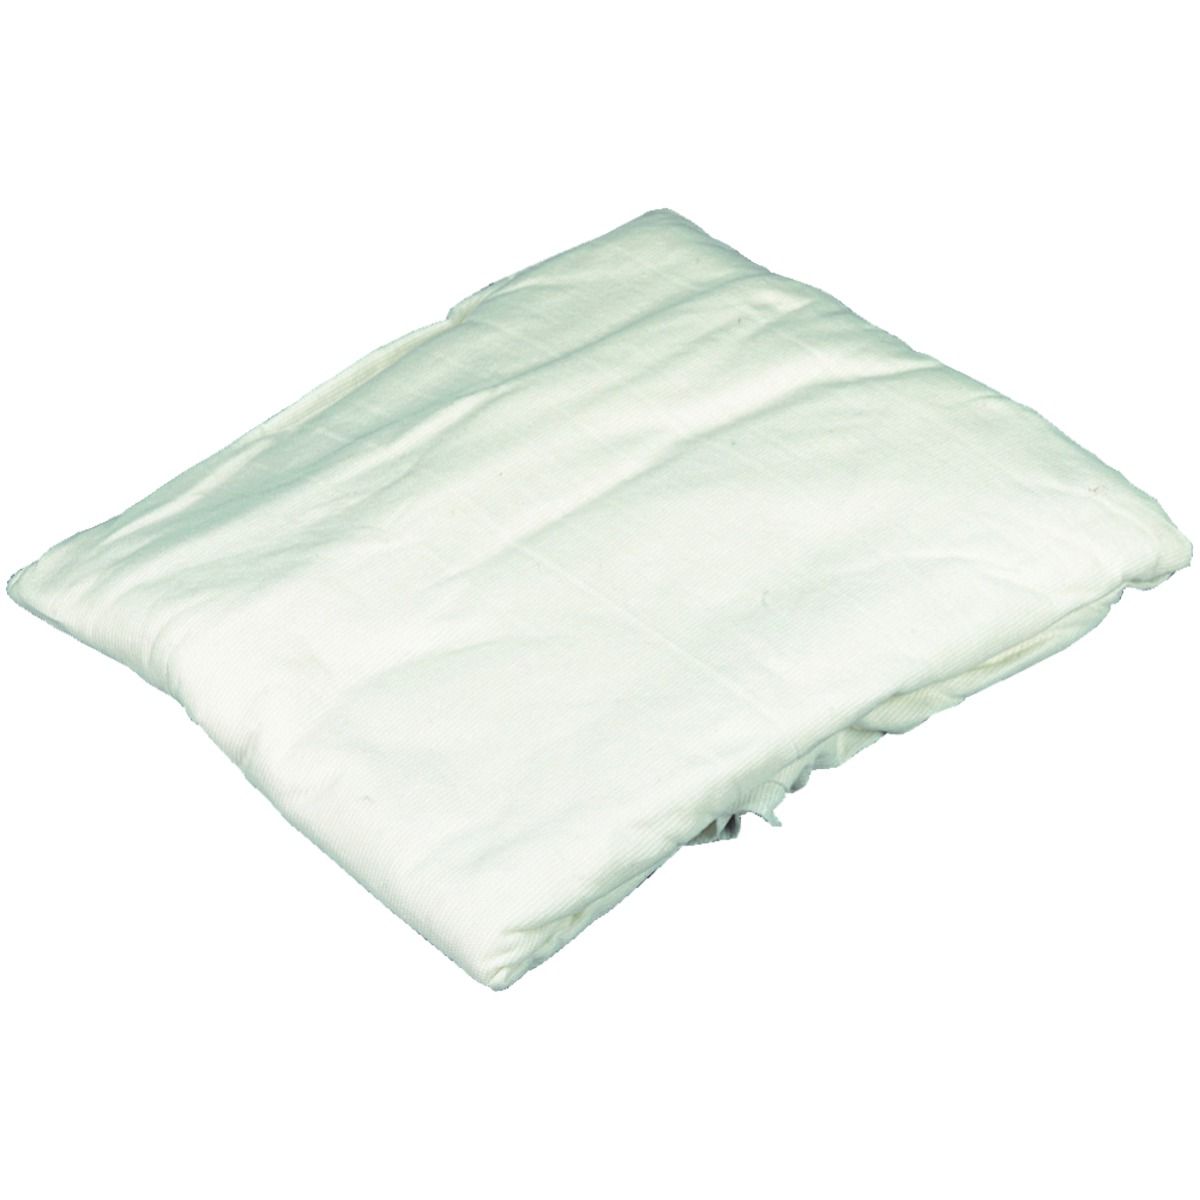 Image of Professional Cotton Dust Sheet - 3.6 x 2.7m